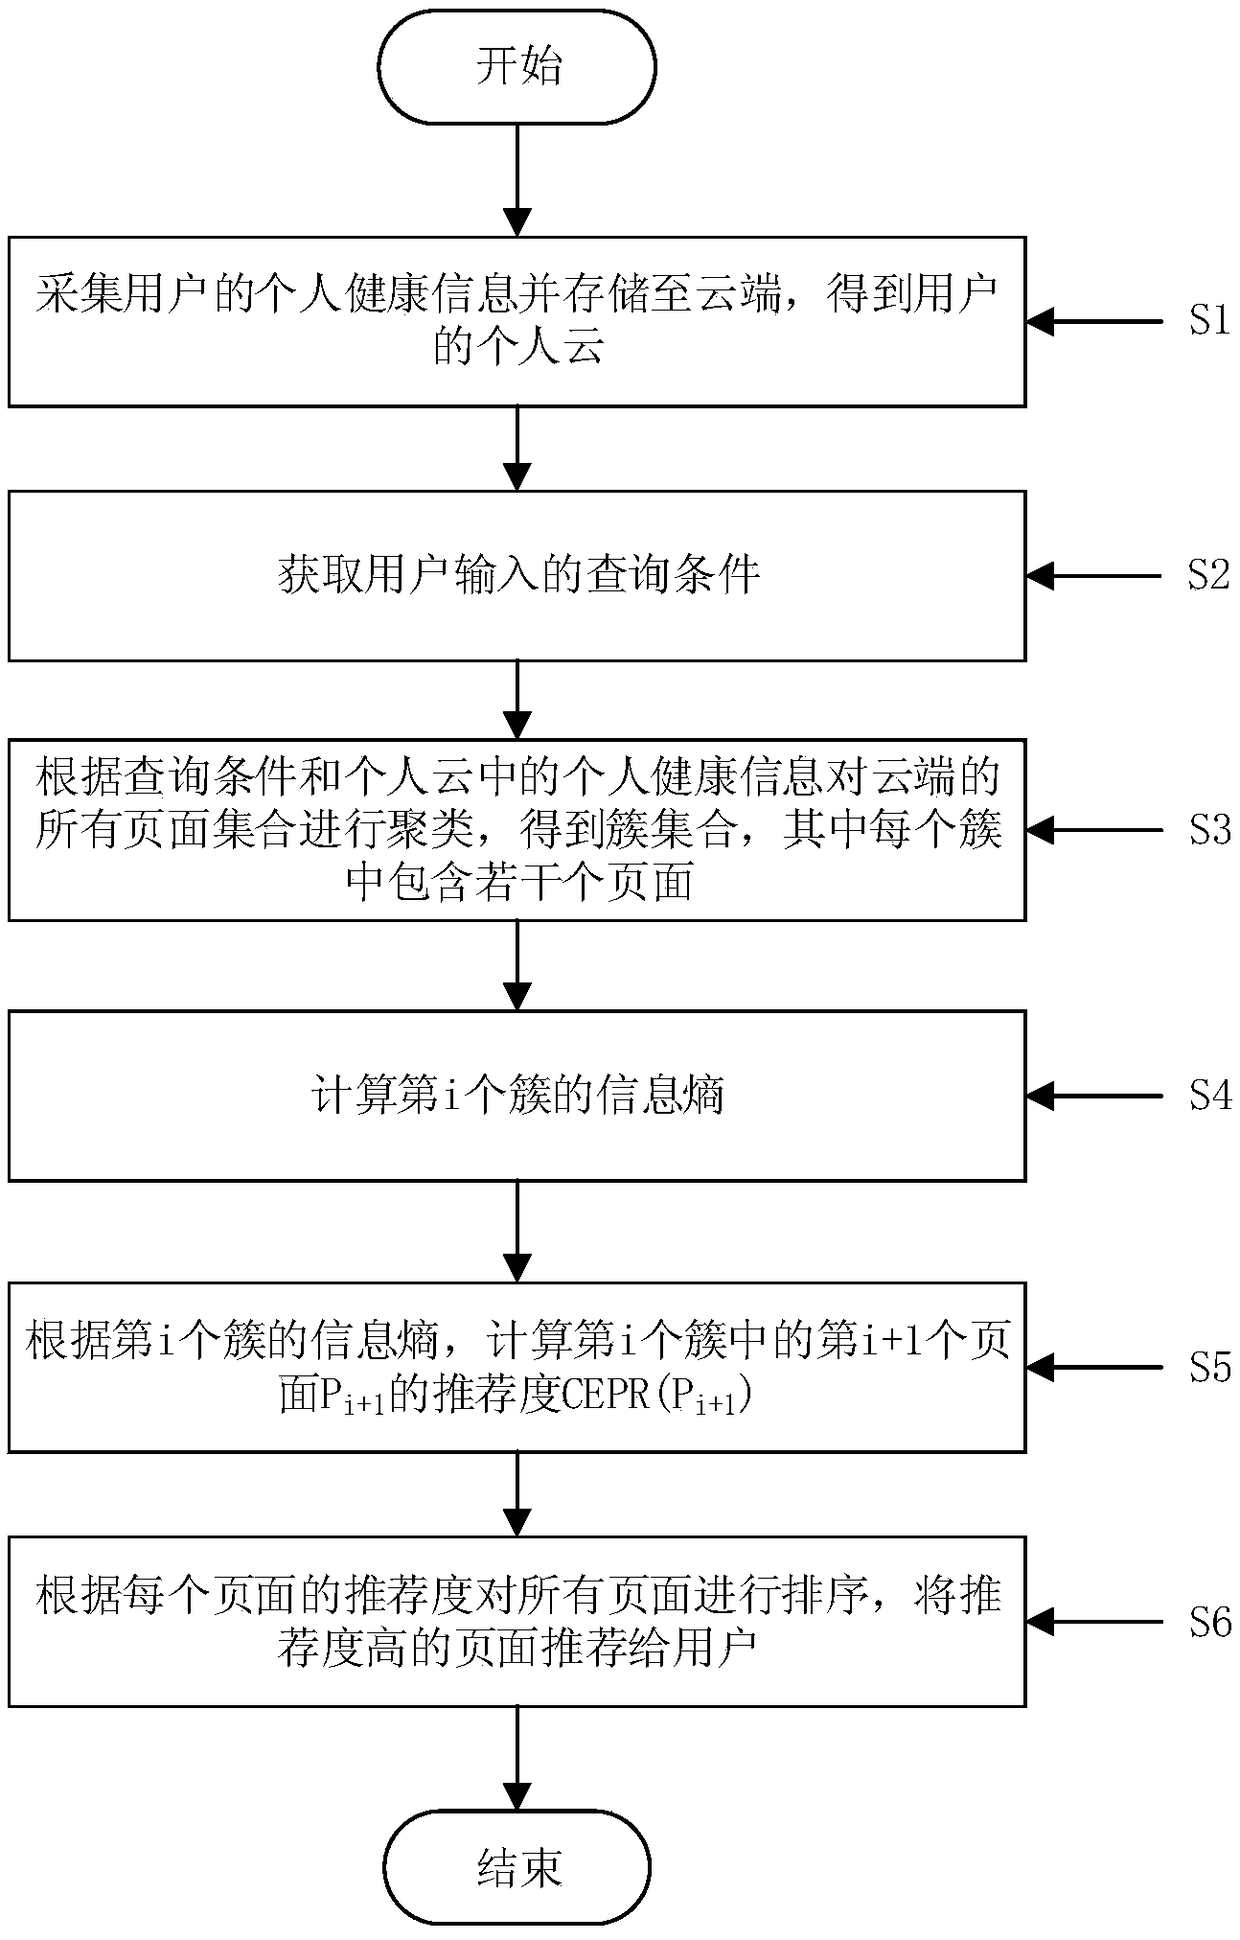 Personal medical information recommendation method and system based on cloud computing